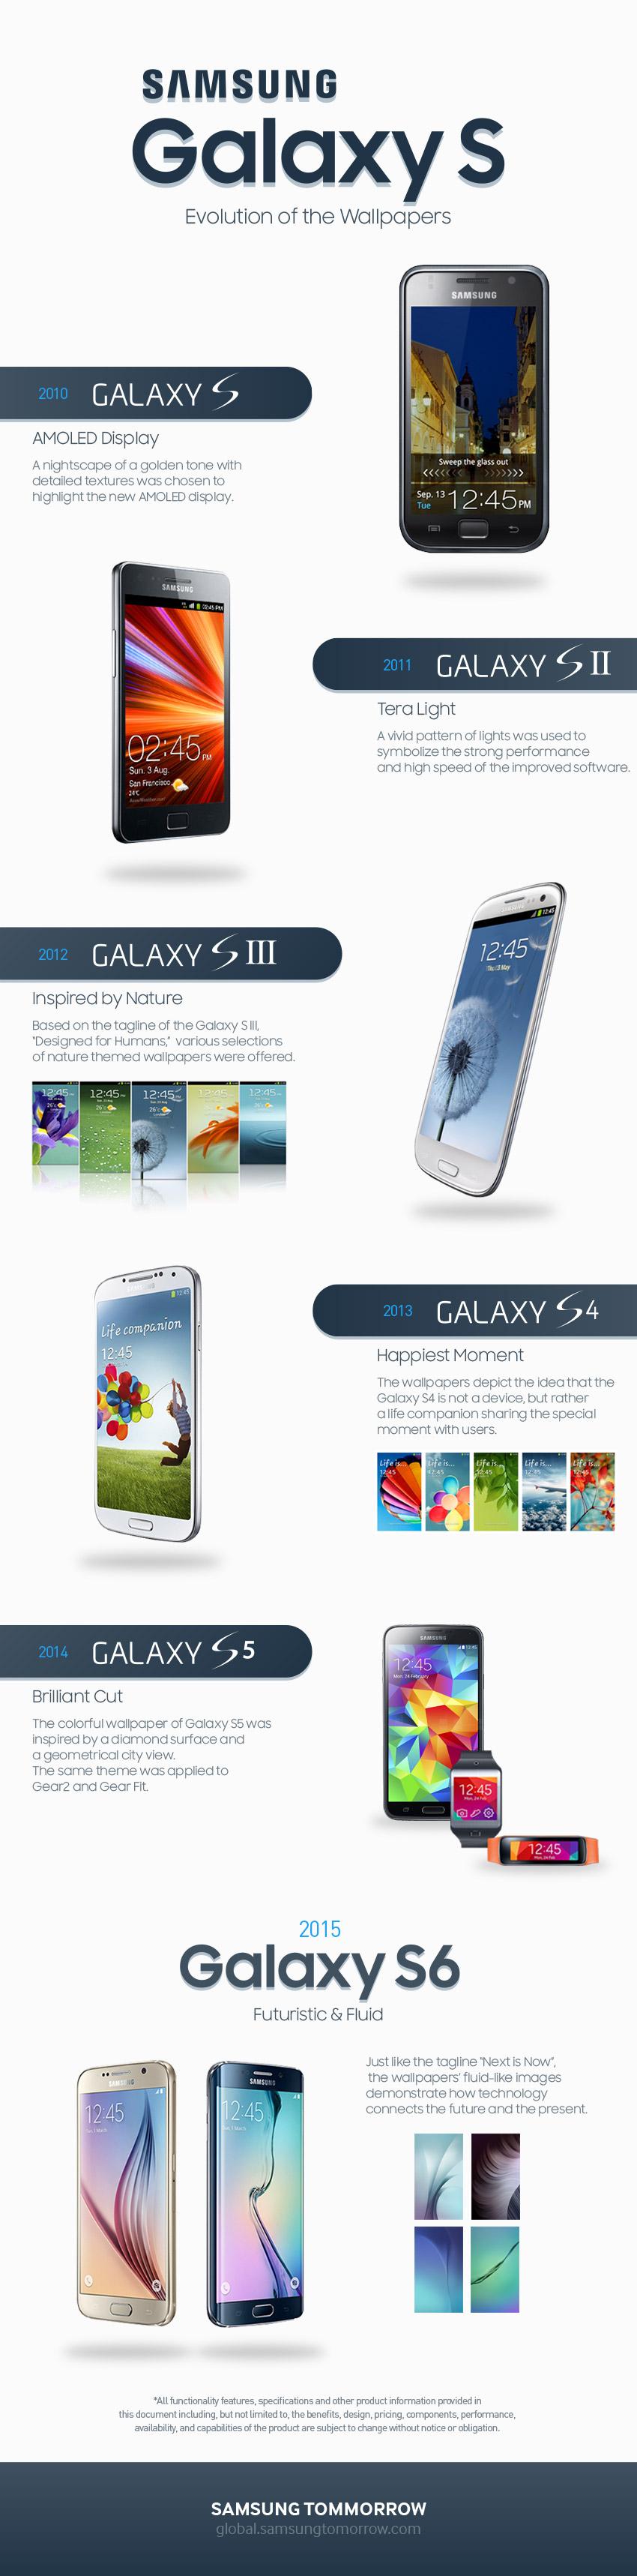 Infographic The Iconic Wallpaper Of Galaxy S Series